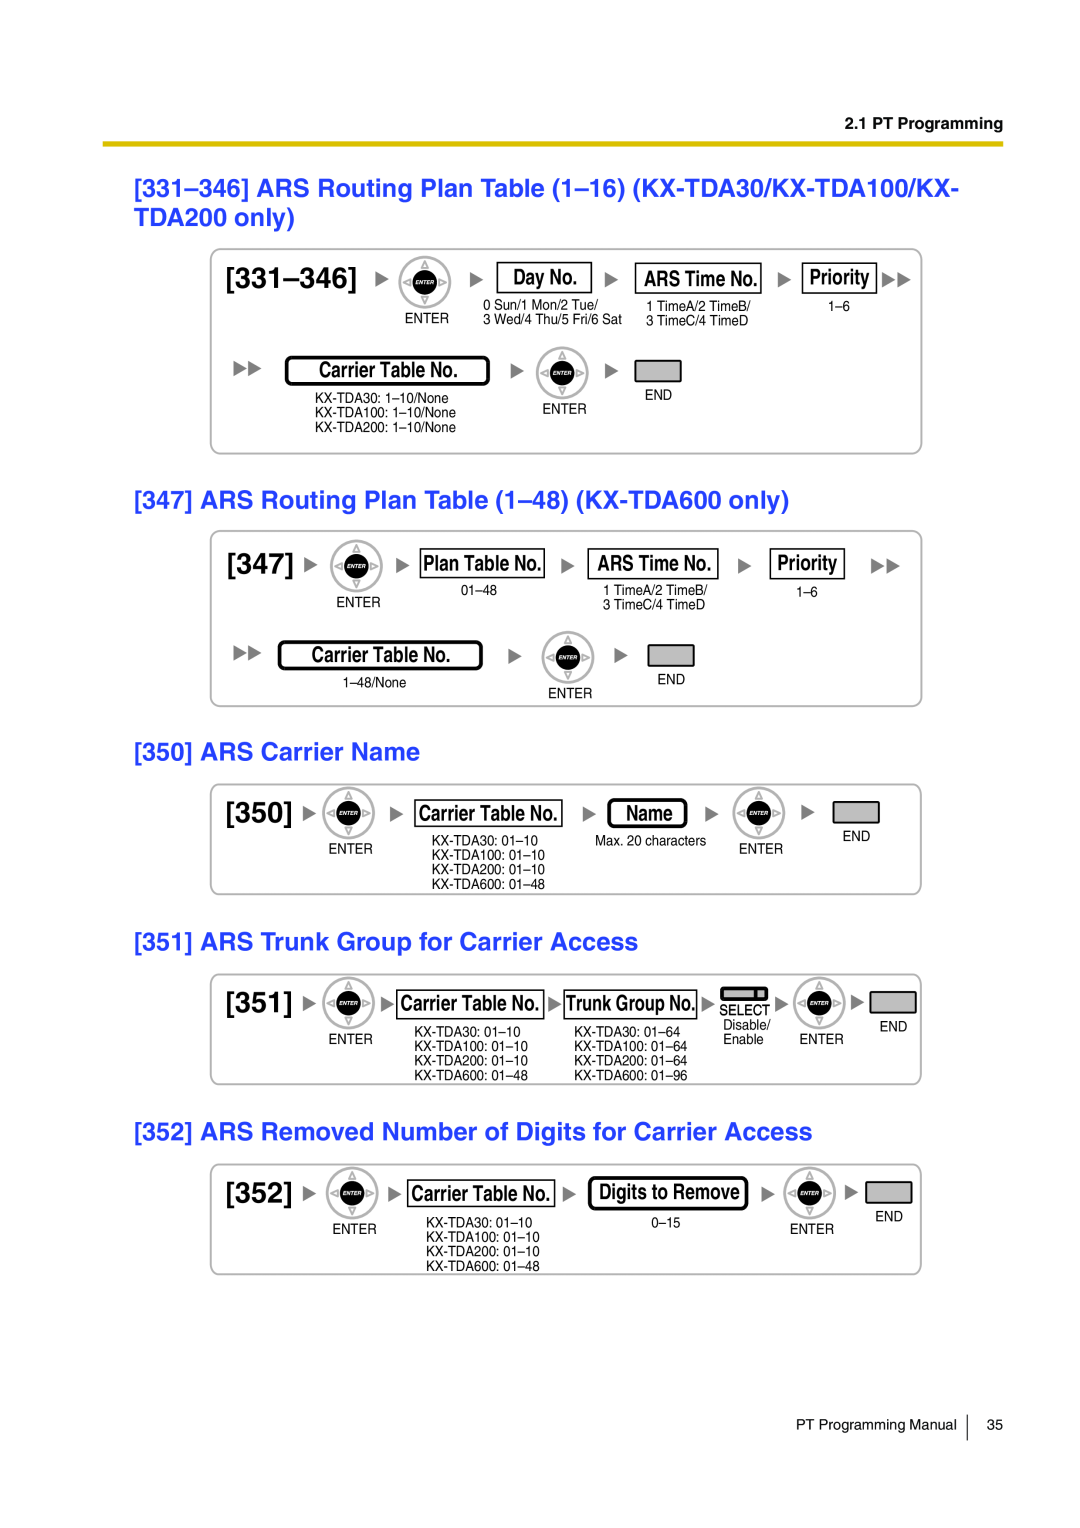 Panasonic KX-TDA200 331-346, ARS Routing Plan -48 KX-TDA600 only, ARS Carrier Name, ARS Trunk Group for Carrier Access 